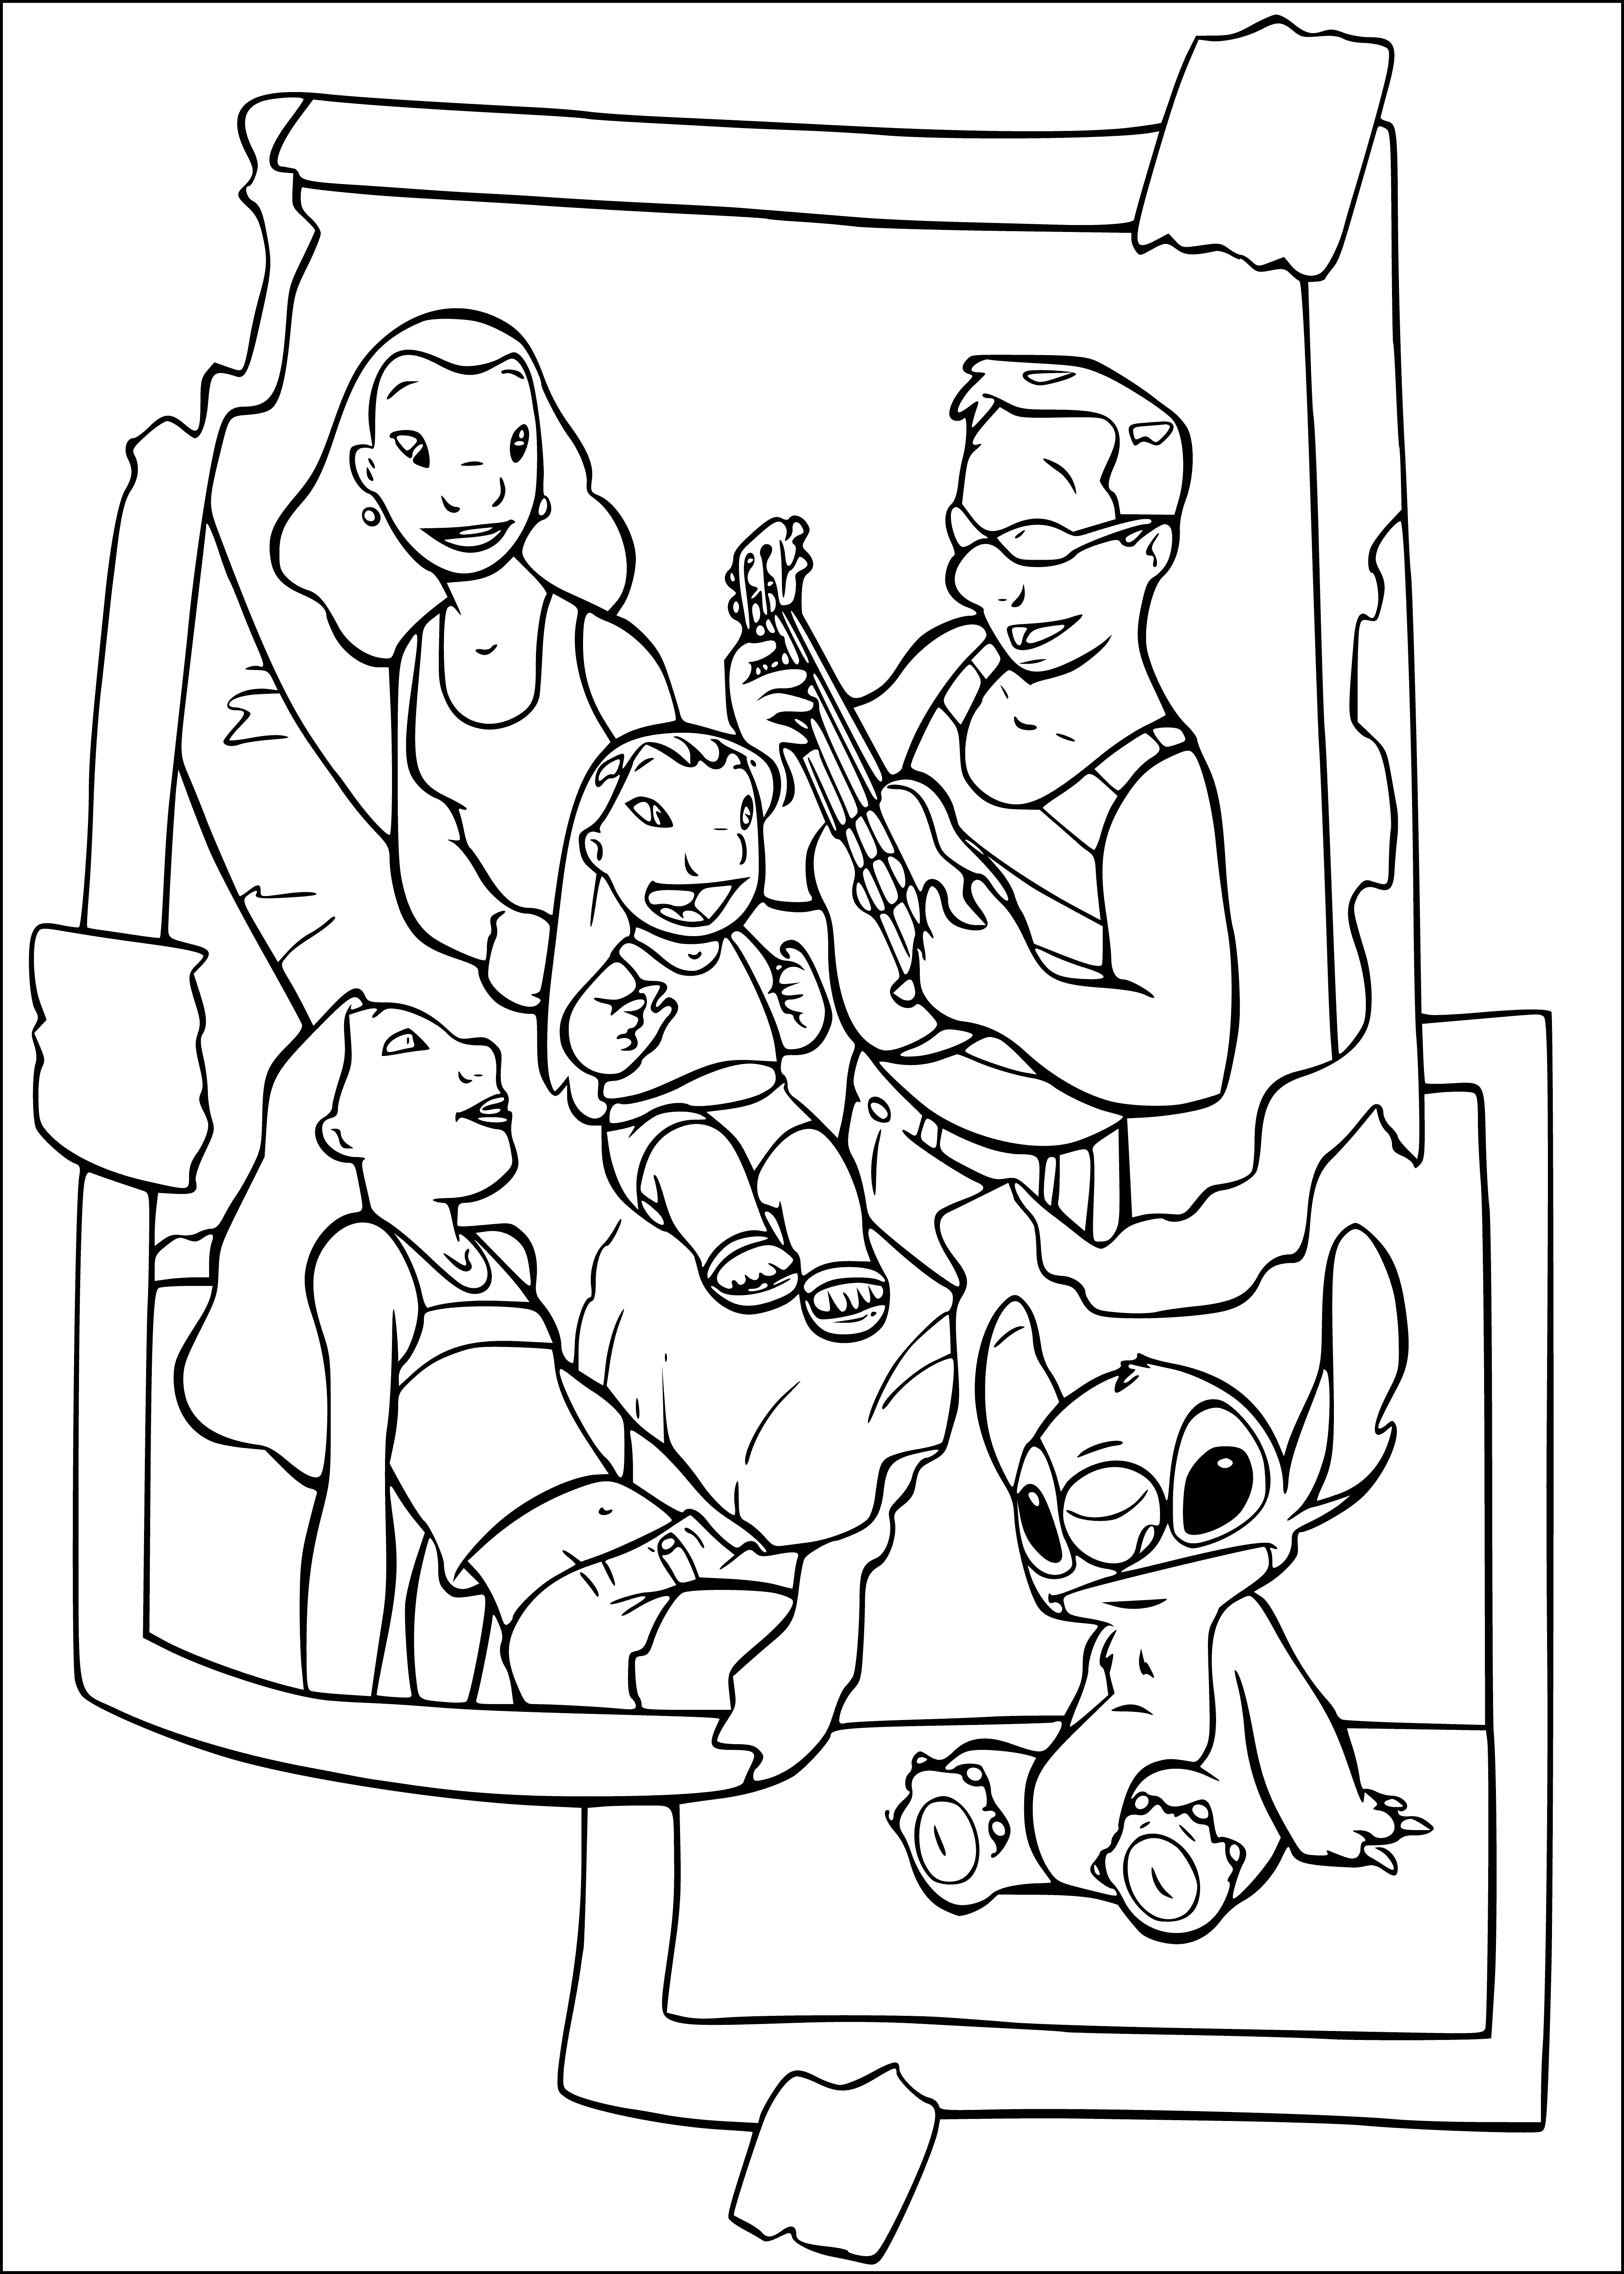 Stitch's new family coloring page